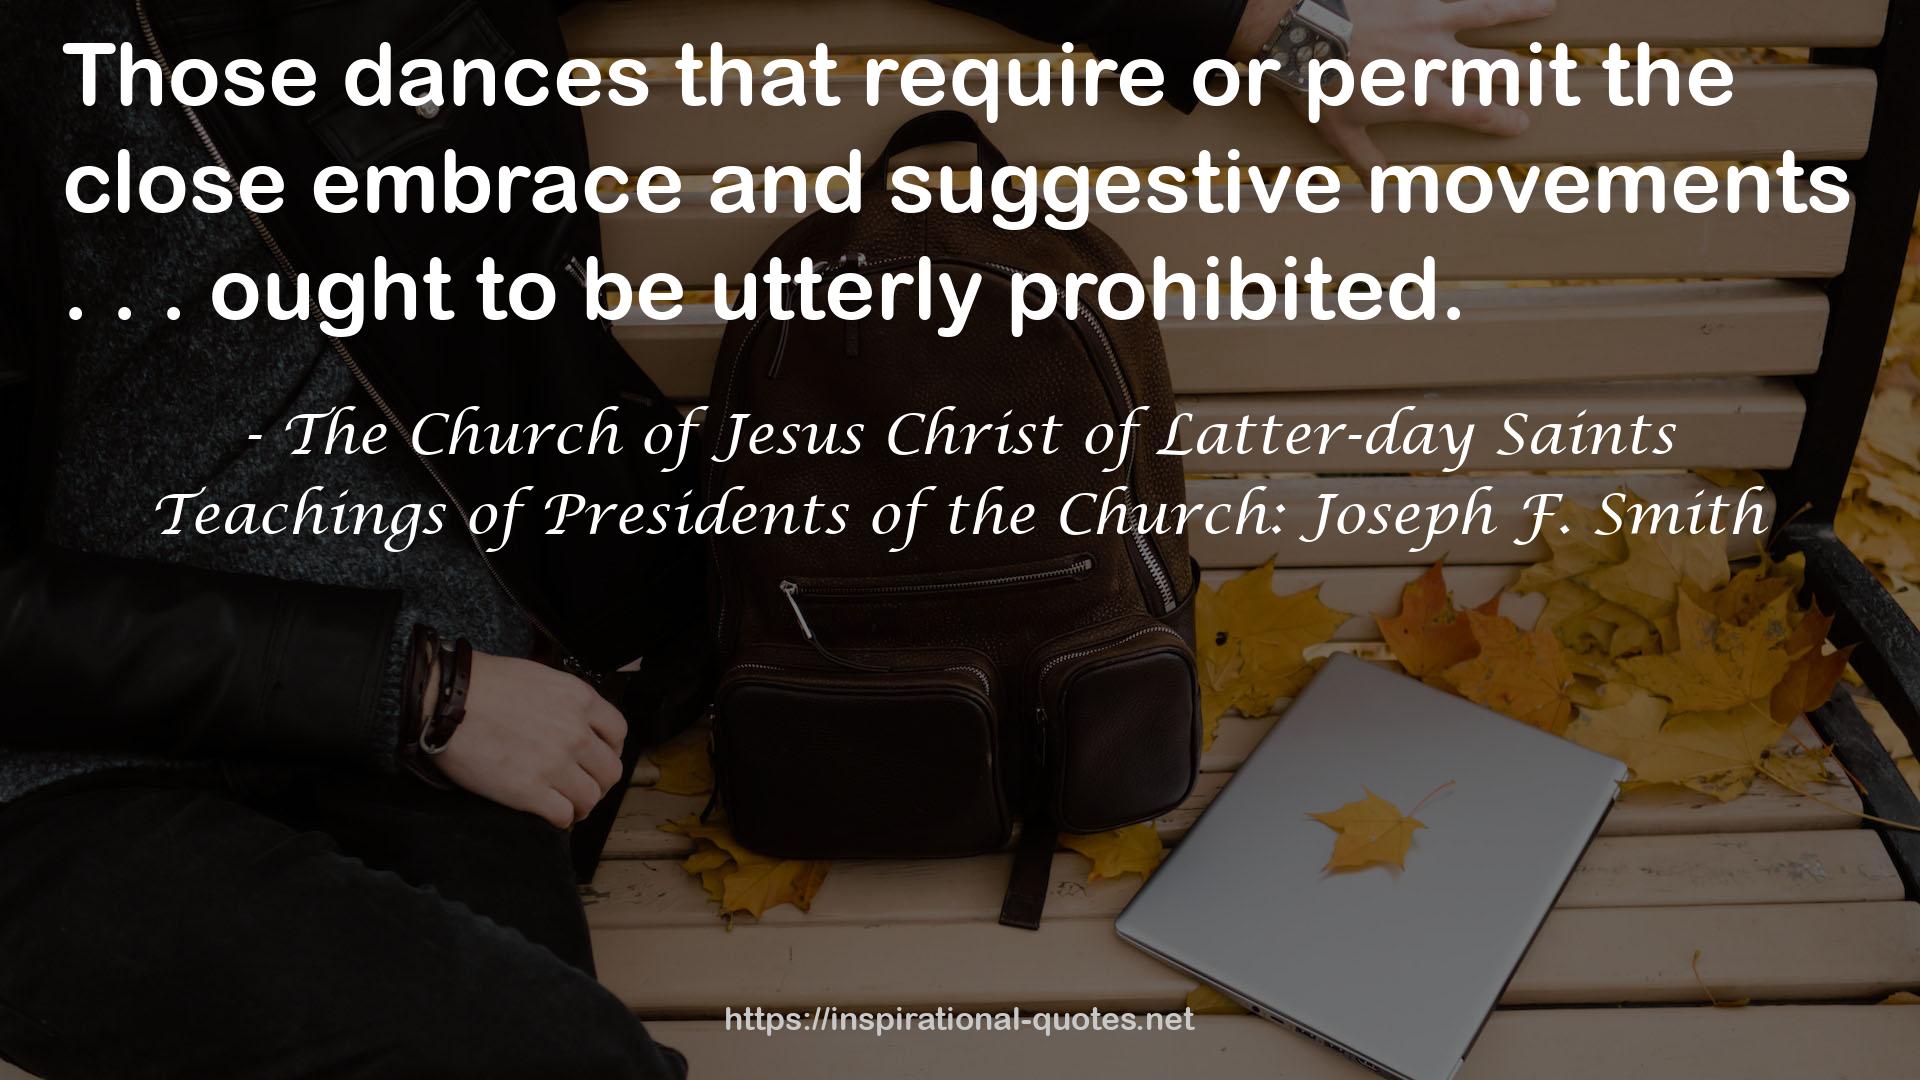 Teachings of Presidents of the Church: Joseph F. Smith QUOTES